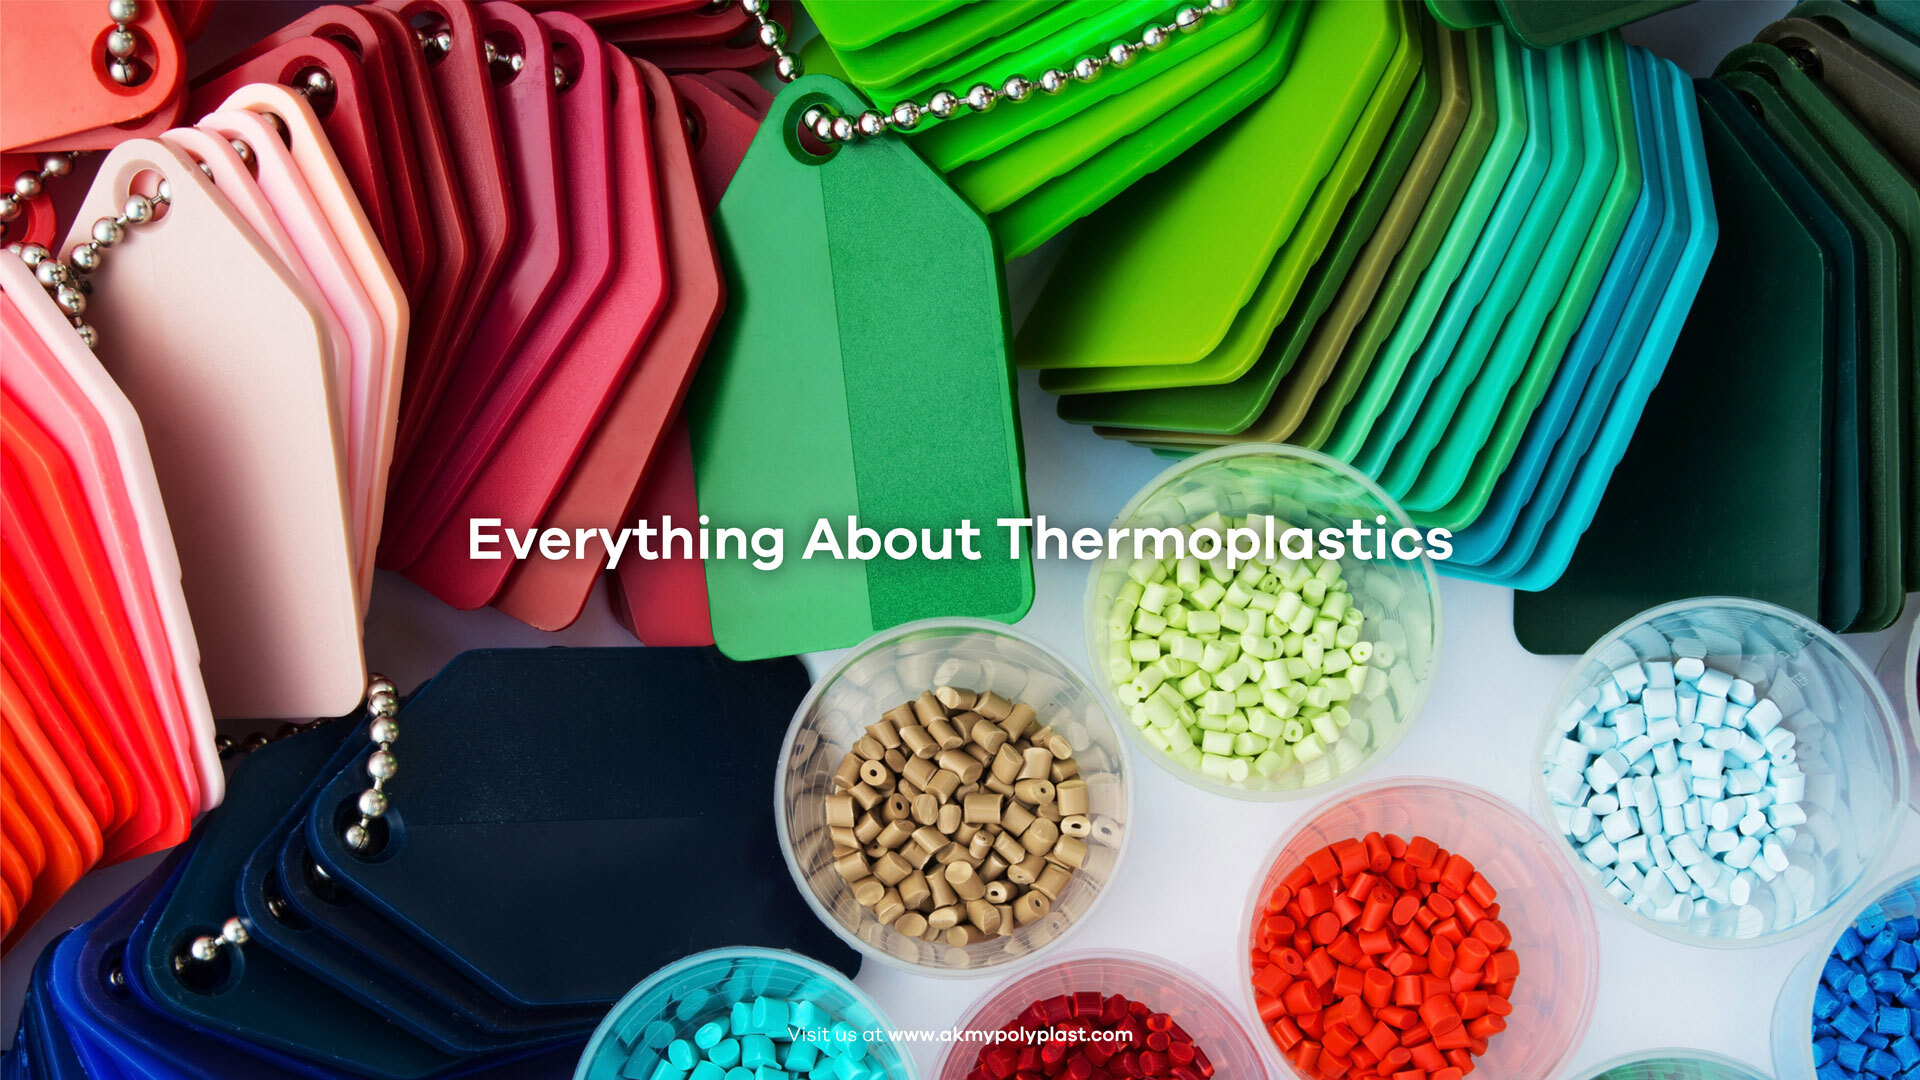 What are Thermoplastics or Extrusion sheets? All you need to know